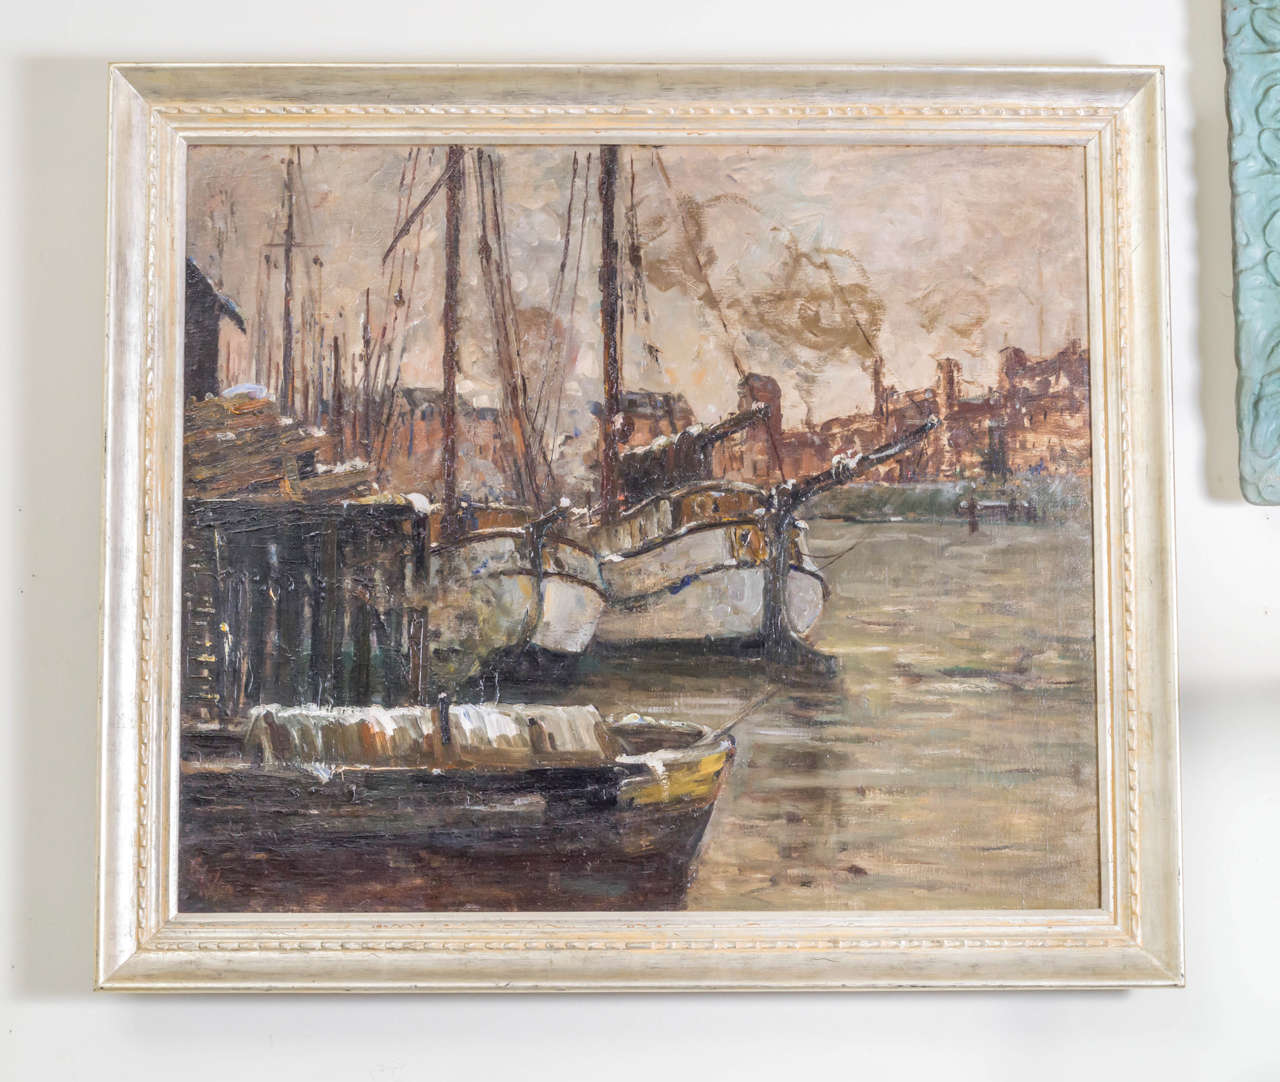 Framed oil on canvas painting of a harbour scene by Toni Magpie (Elster). Toni Magpie (Elster). (1862-1948) lived and was active in Bremen or Munich, Germany. Carved wood silver gilt frame,
circa 1925.